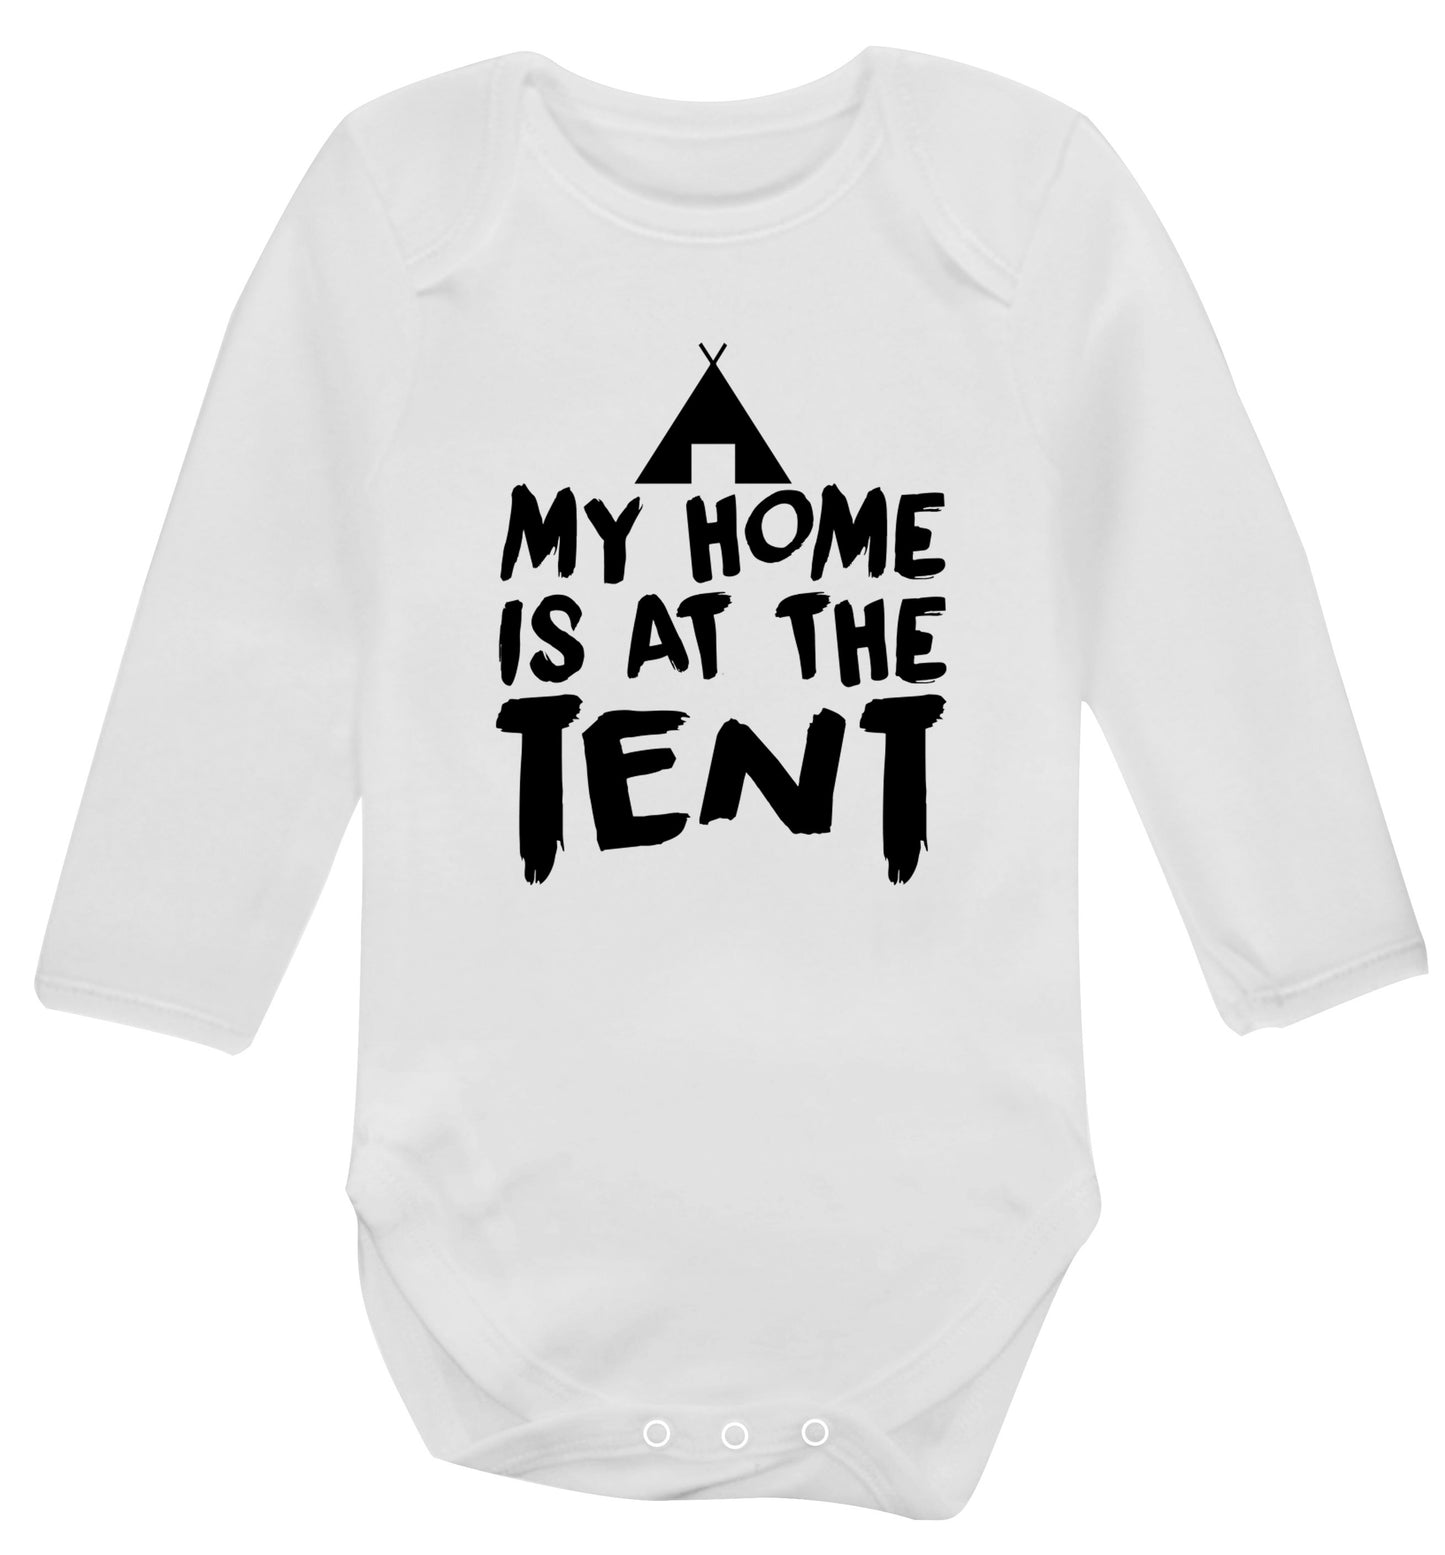 My home is at the tent Baby Vest long sleeved white 6-12 months